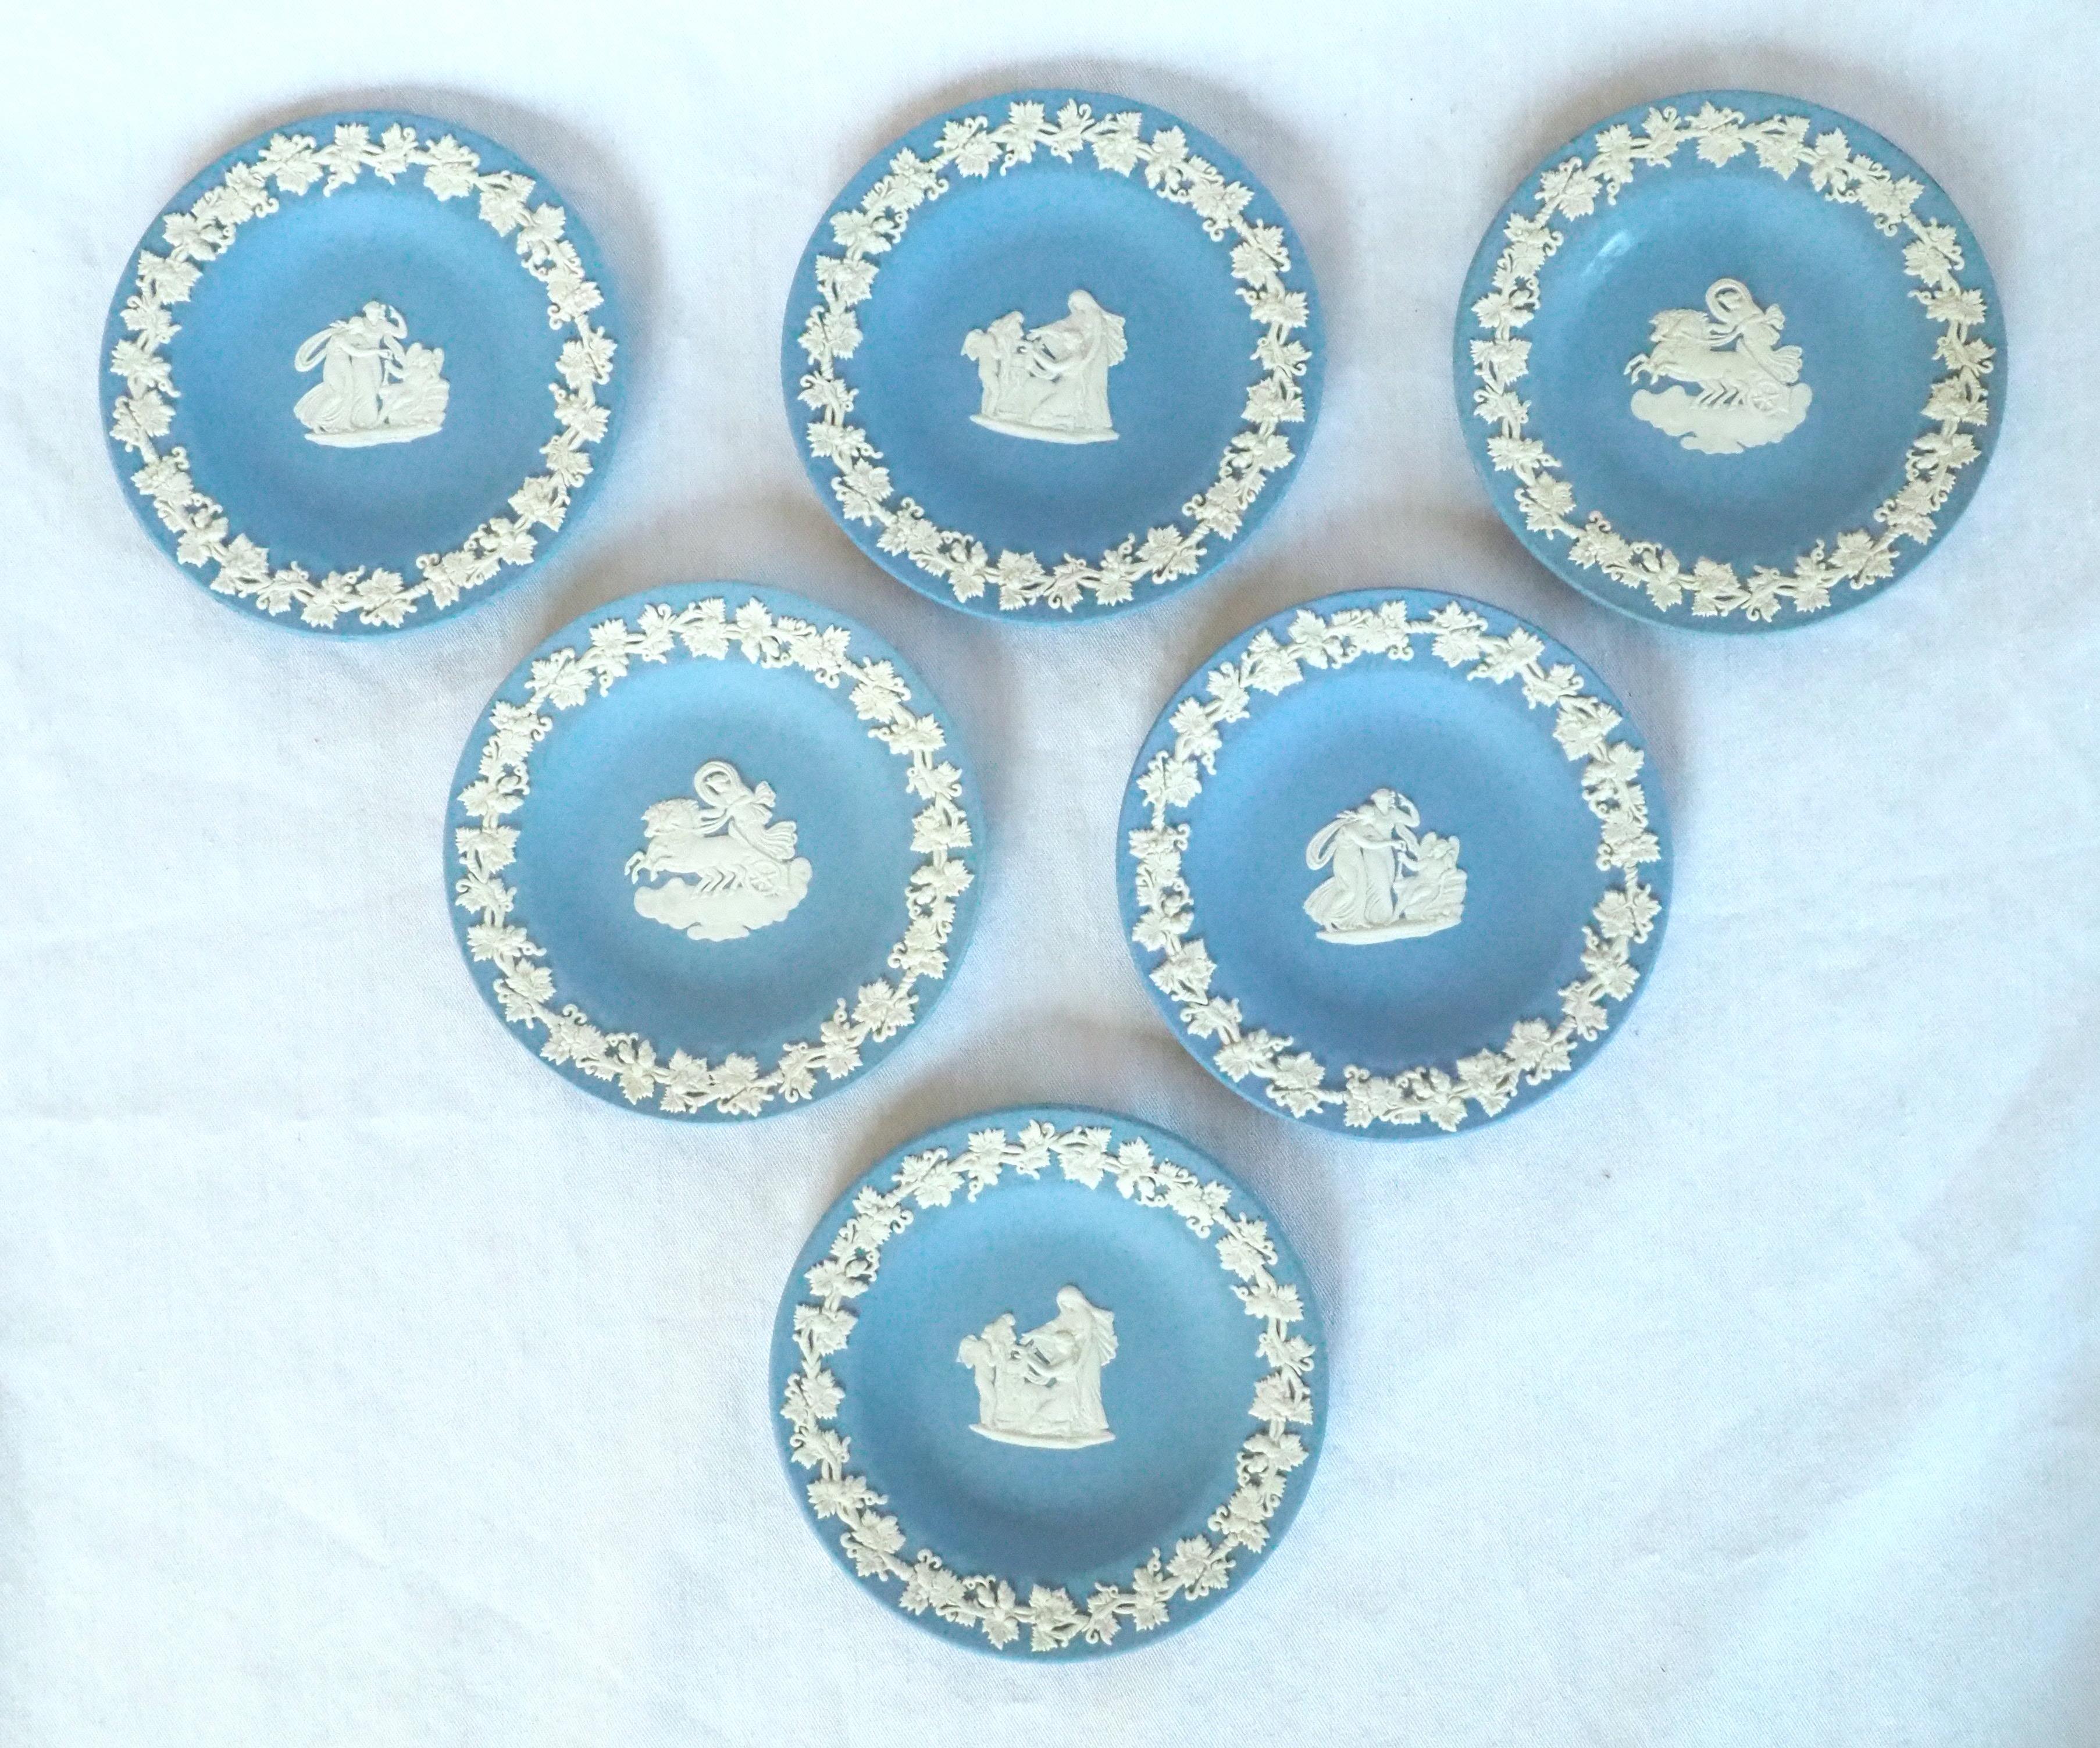 Set of 6 Wedgwood jasperware trinket trays, beautiful neoclassical style item decorated with white antique-style scenes.
Second half of 20th century refined and highly decorative item that reminds 18th century refinement. An elegant grapevine frieze